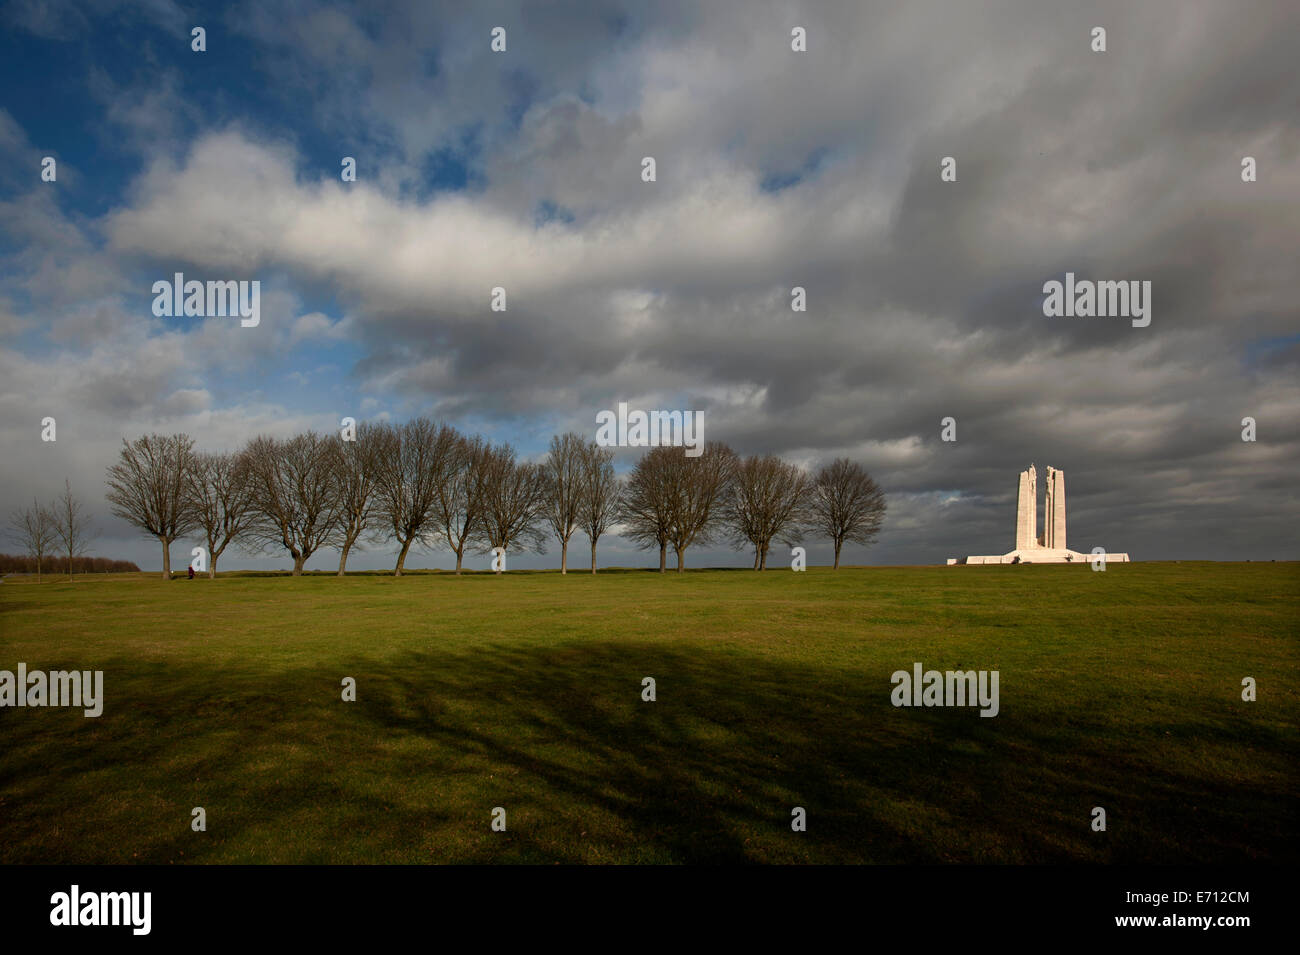 Vimy Ridge WW1 Canadian National Memorial and Battlefield, Vimy, France. February 2014 The memorial took monument designer Walte Stock Photo